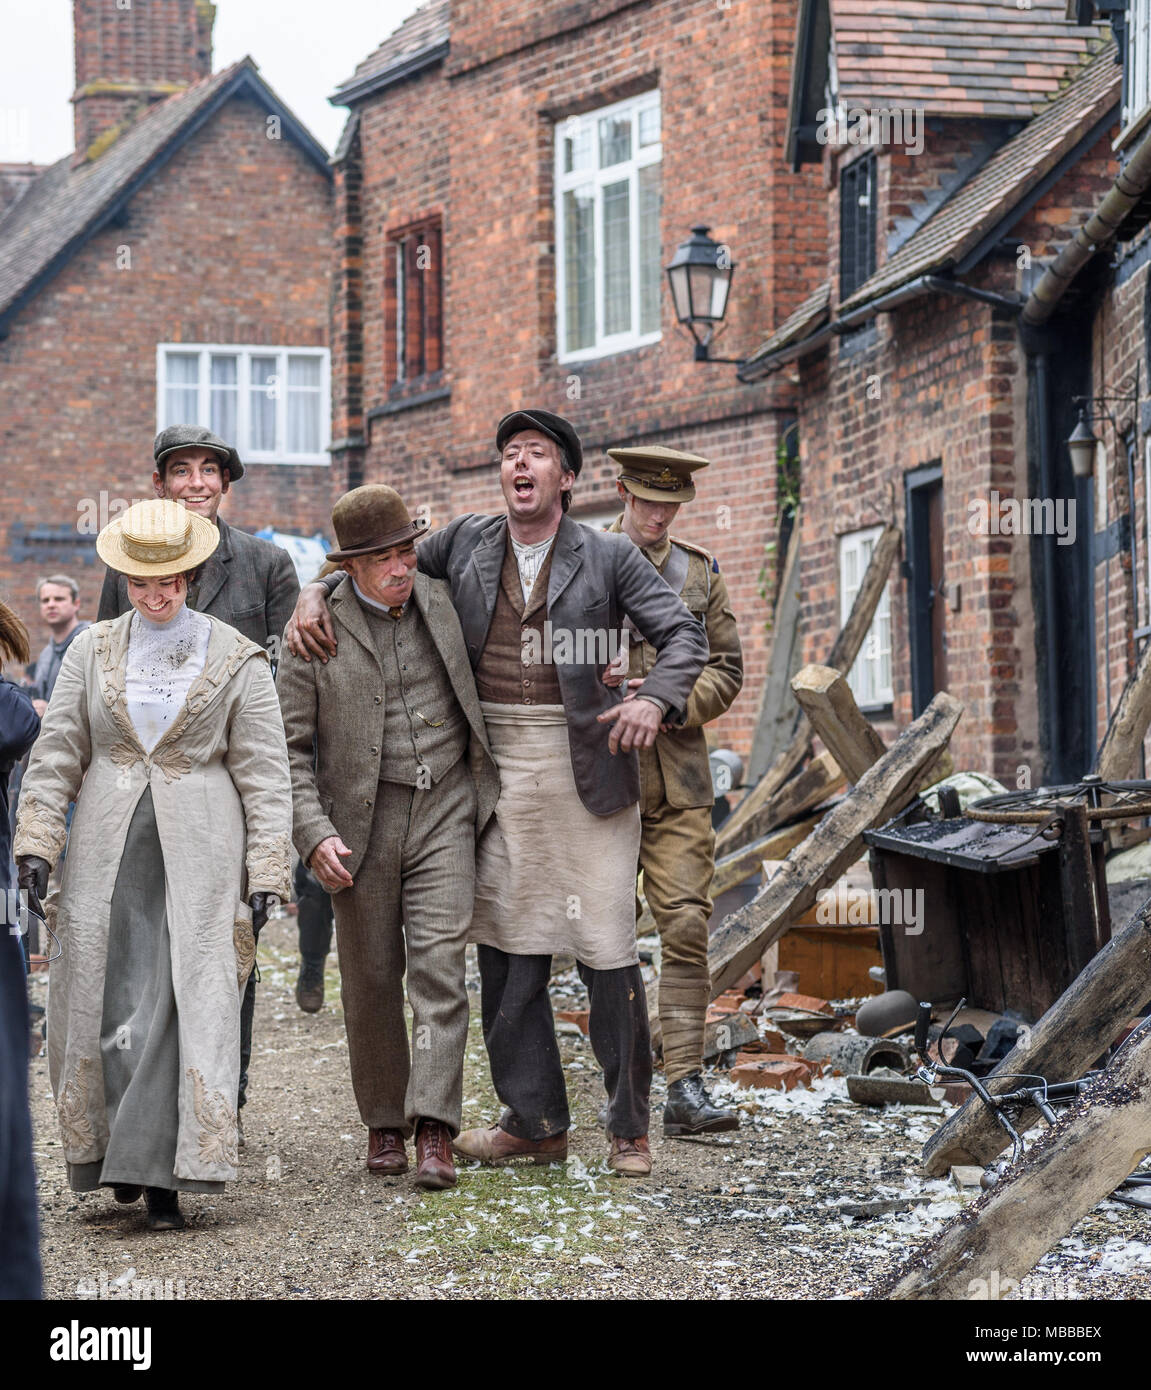 Great Budworth, UK. 9th April, 2018. Actors dressed in Edwardian costumes, starring in the new BBC drama 'War Of The Worlds' by HG Wells, return from filming in the streets of Great Budworth village, Cheshire on Monday afternoon, April 9th. Credit: Ian Hubball/Alamy Live News Stock Photo